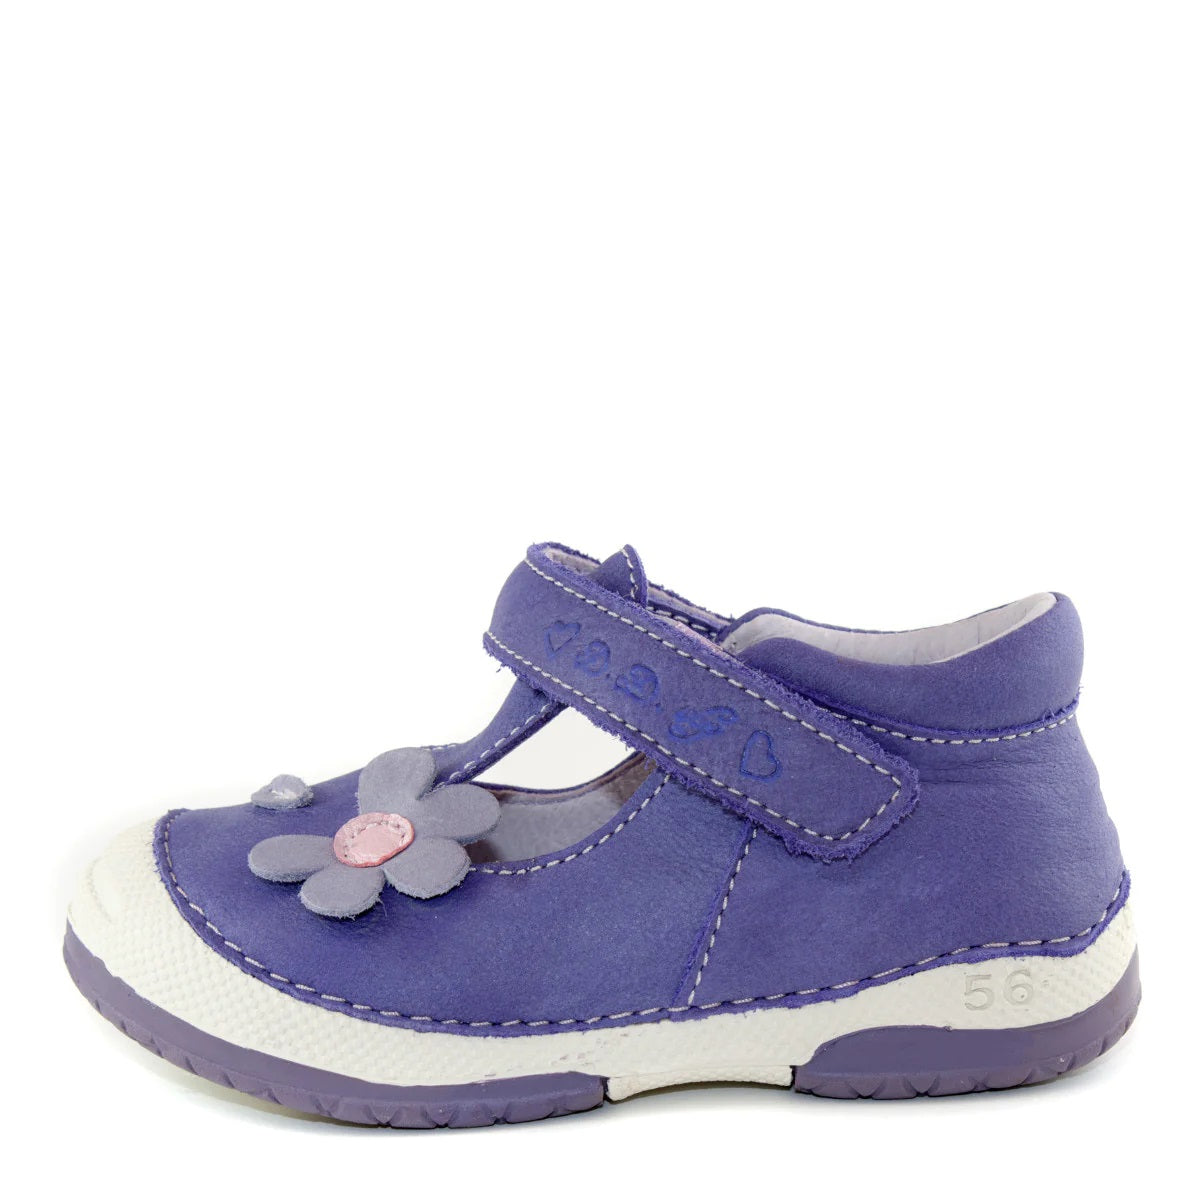 Premium quality dress shoes with genuine leather lining and upper in violet color with cute flower pattern and single strap. Thanks to its high level of specialization, D.D. Step knows exactly what your child’s feet need, to develop properly in the various phases of growth. The exceptional comfort these shoes provide assure the well-being and happiness of your child.